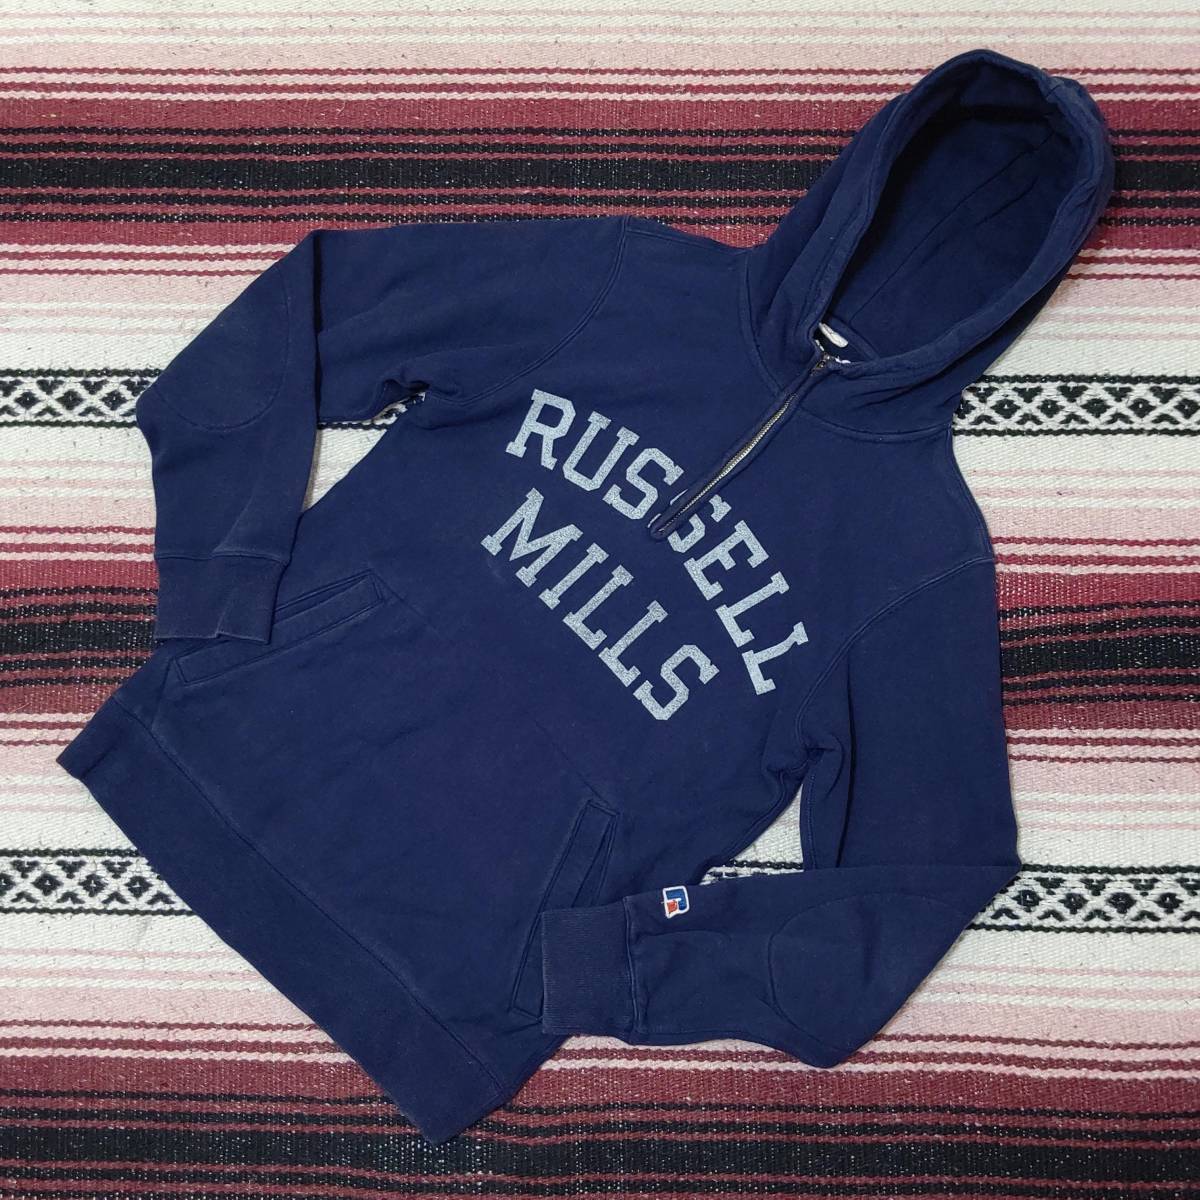  rare model [RUSSELL×ABAHOUSE] russell × Abahouse special order sweat Parker double name collaboration college print navy navy blue M/321j